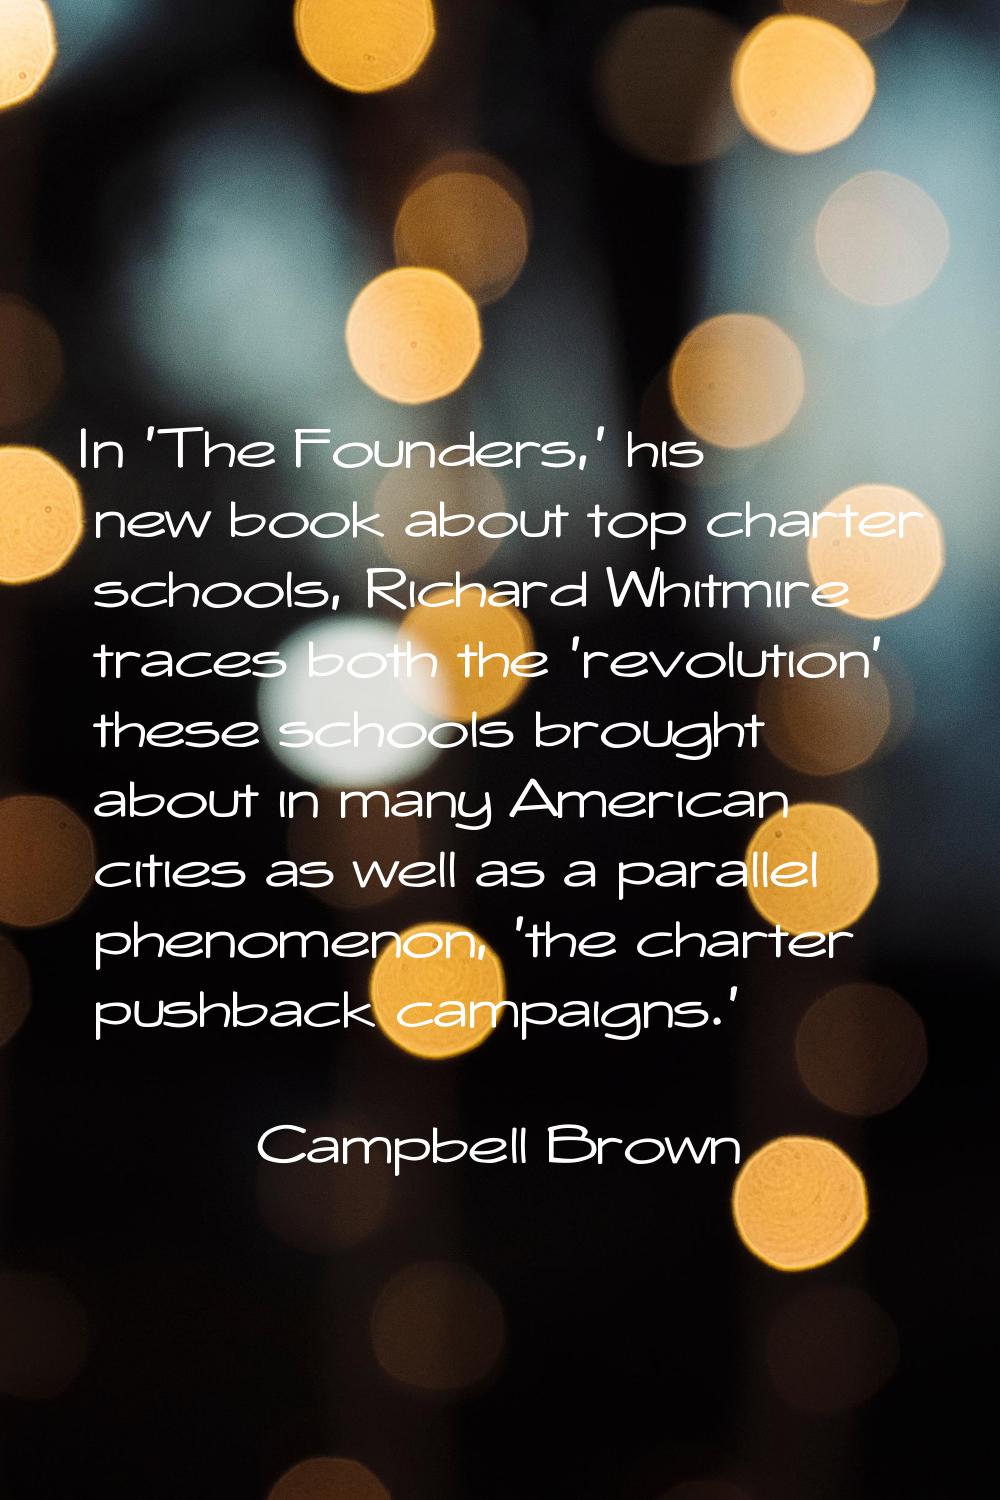 In 'The Founders,' his new book about top charter schools, Richard Whitmire traces both the 'revolu